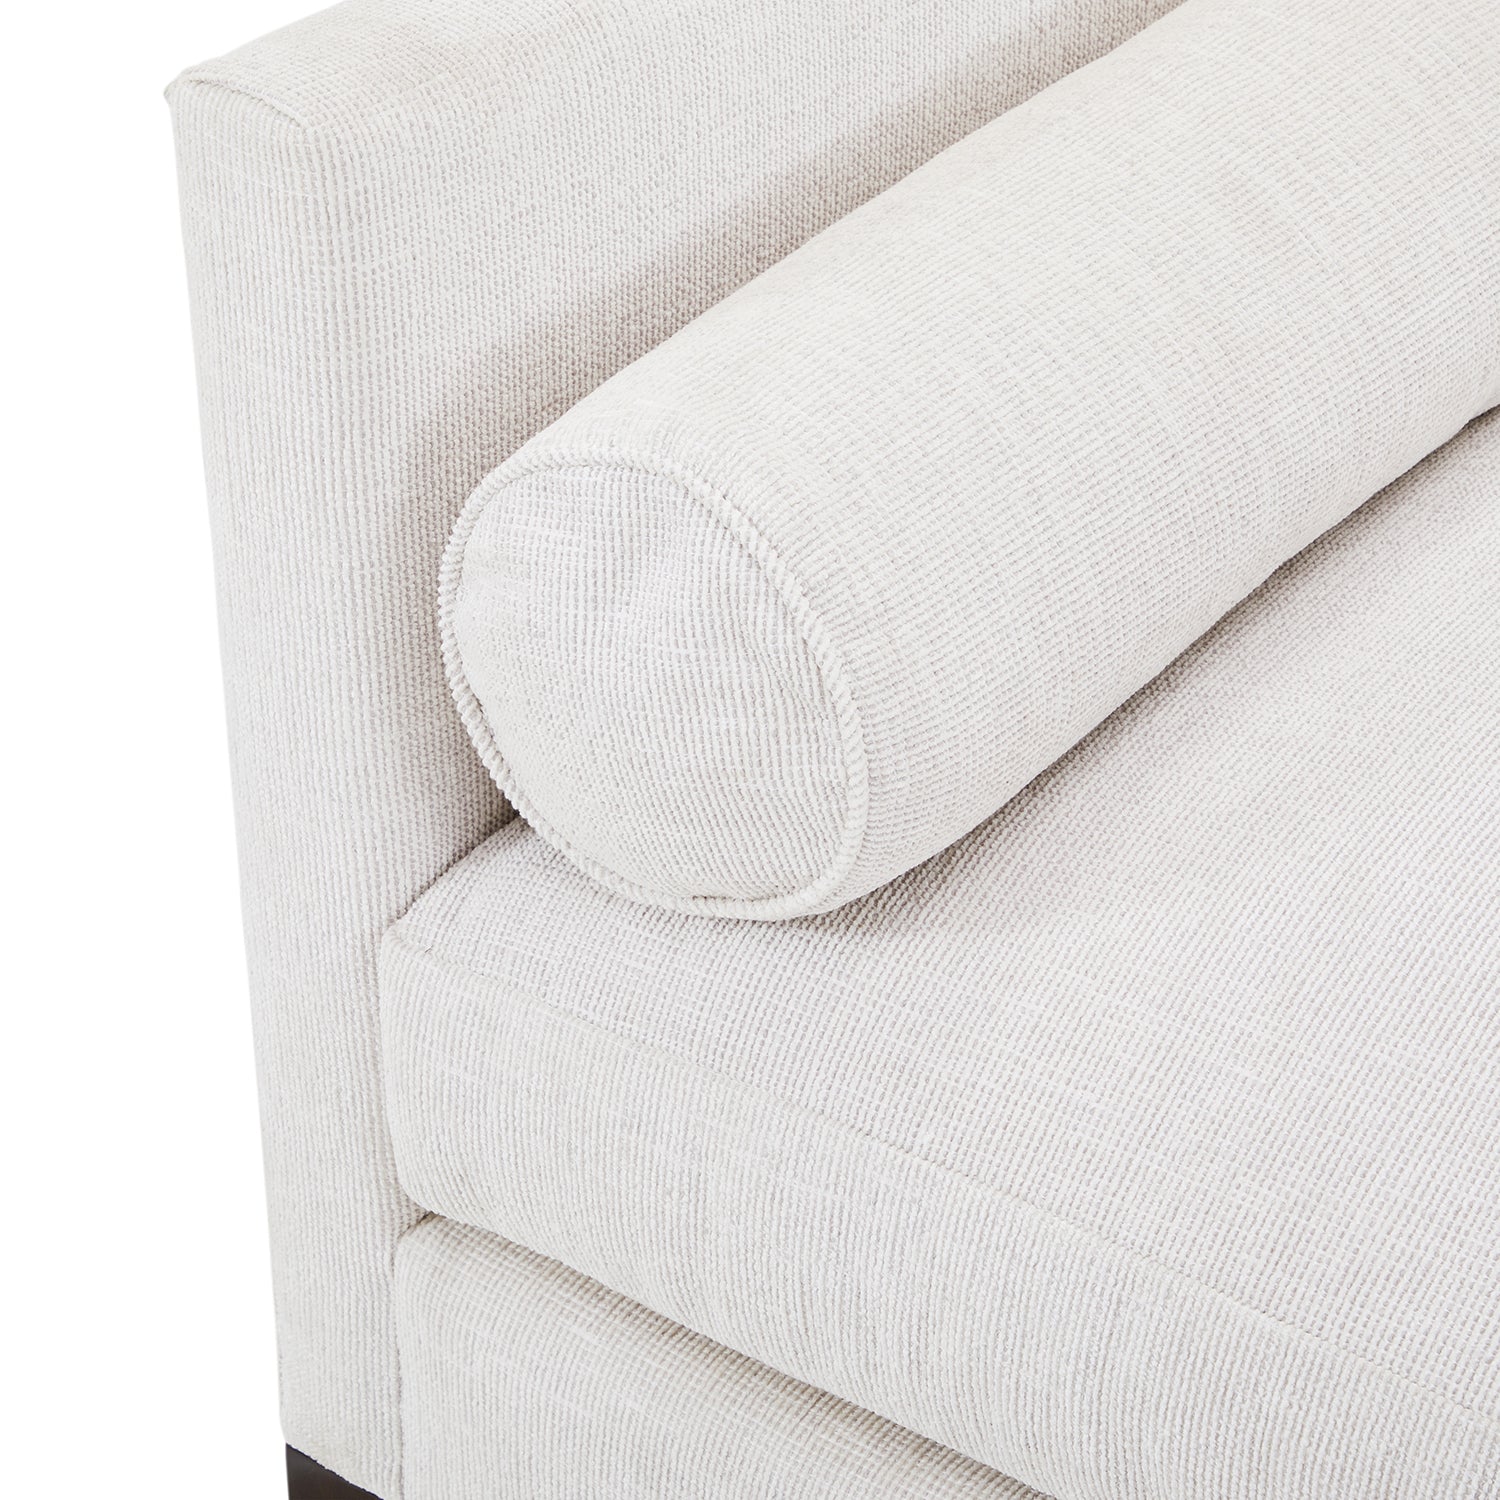 Cream Textured & Roy Sofa Props Double-Sided Gil - Fabric